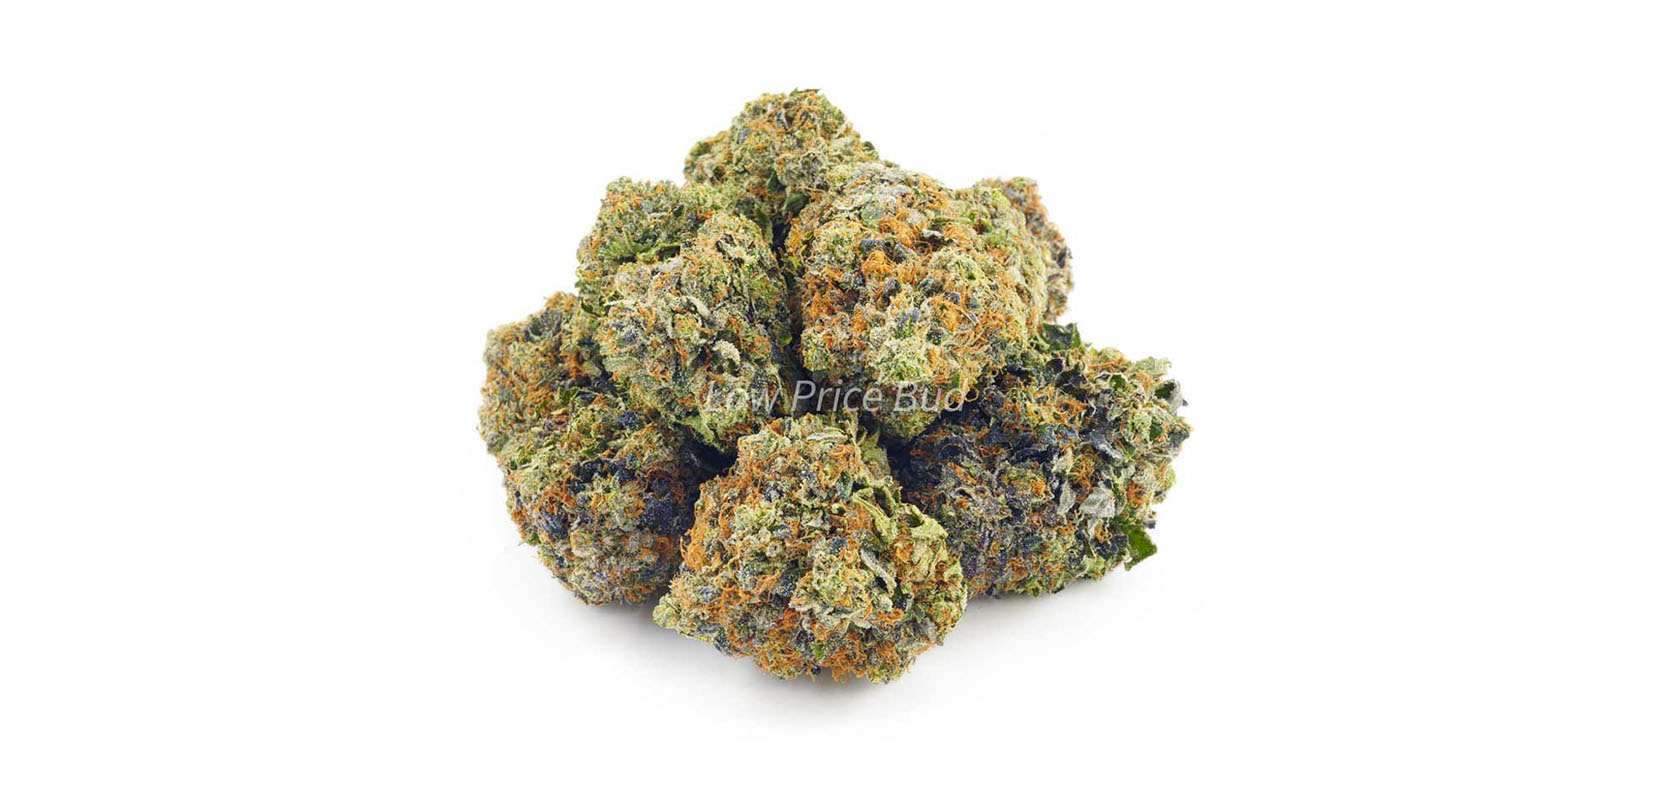 Death Bubba value buds and cheap canna weed online Canada from Low Price Bud weed dispensary. buy weed. 